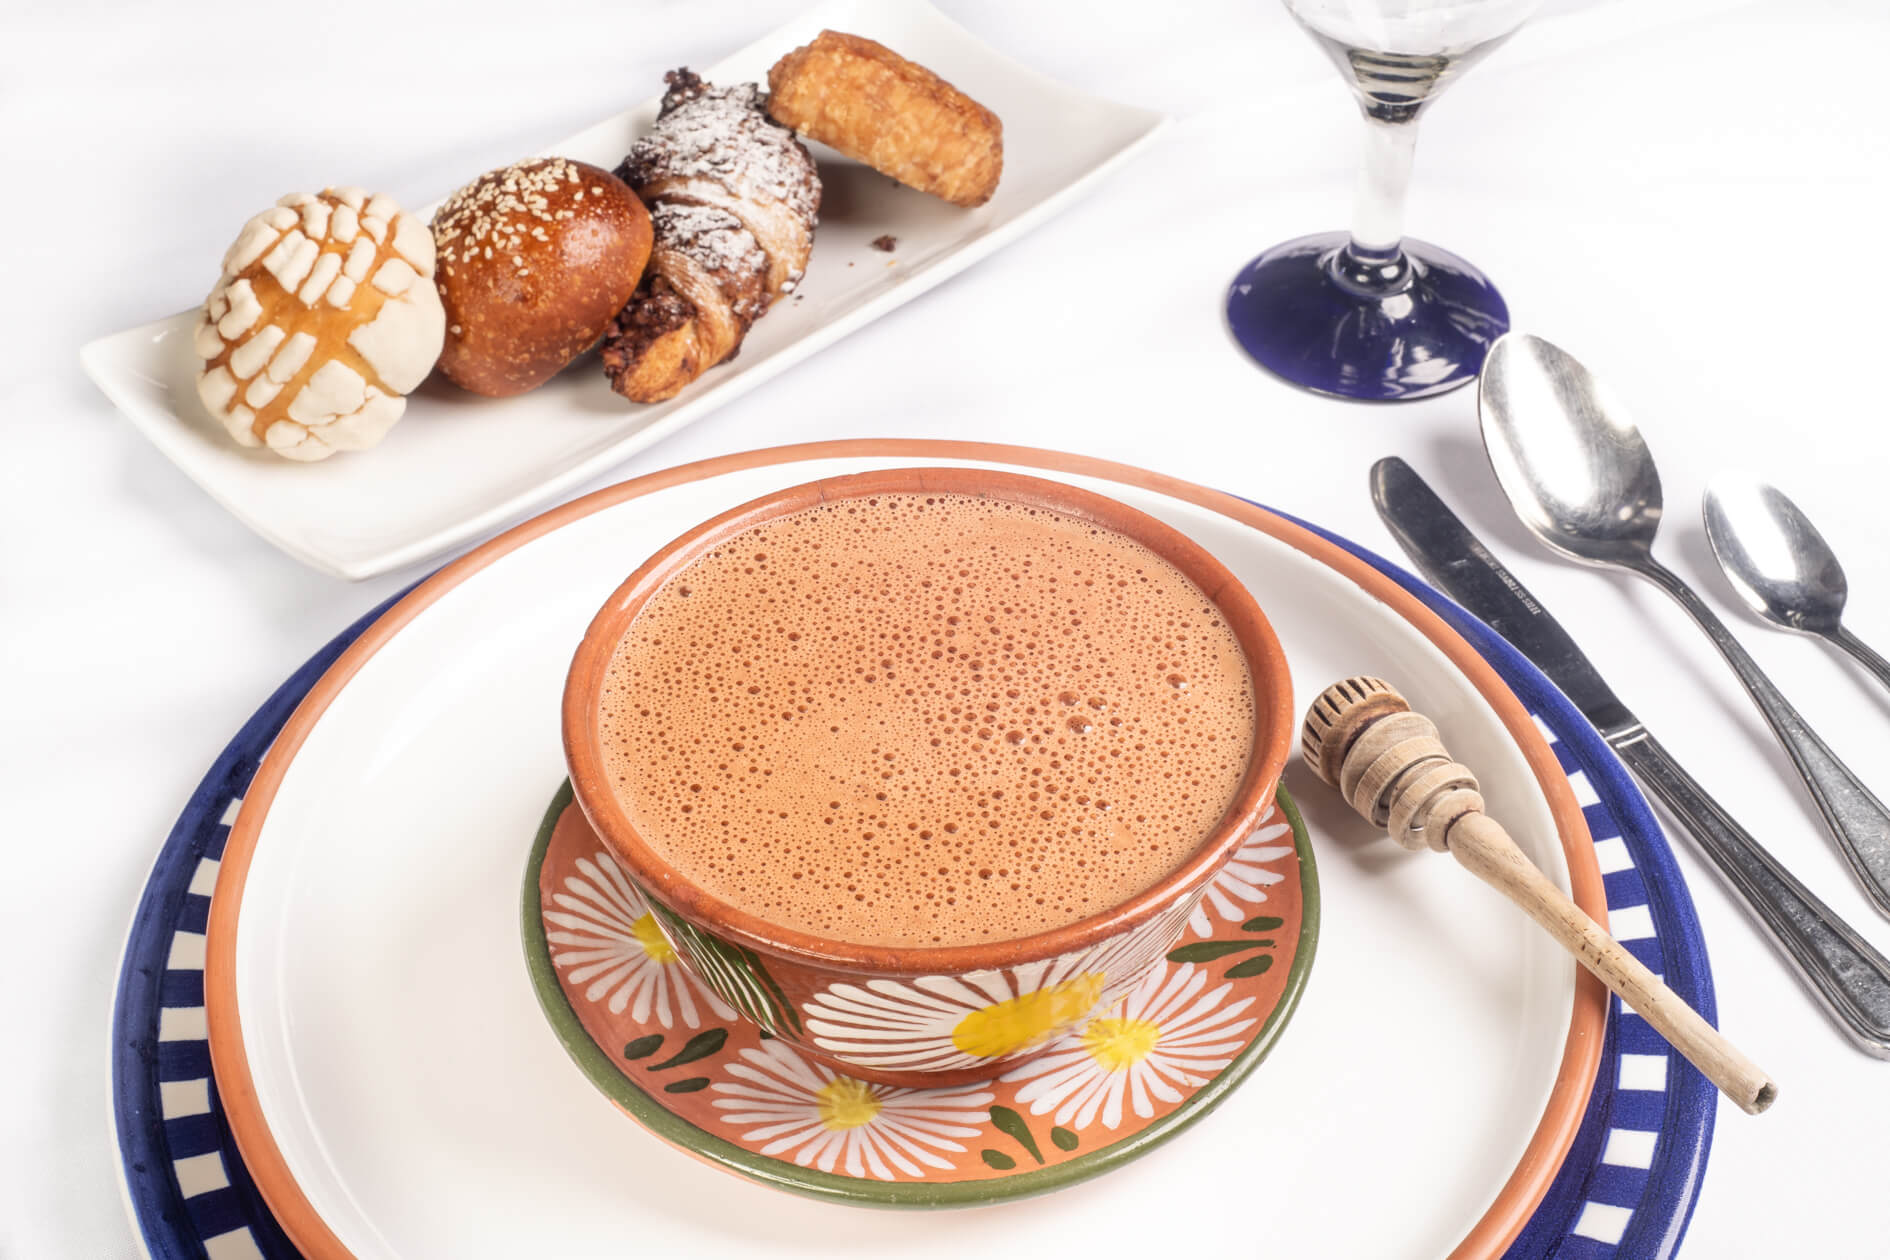 A mug of drinking chocolate in a patterned cup with desserts in the background.